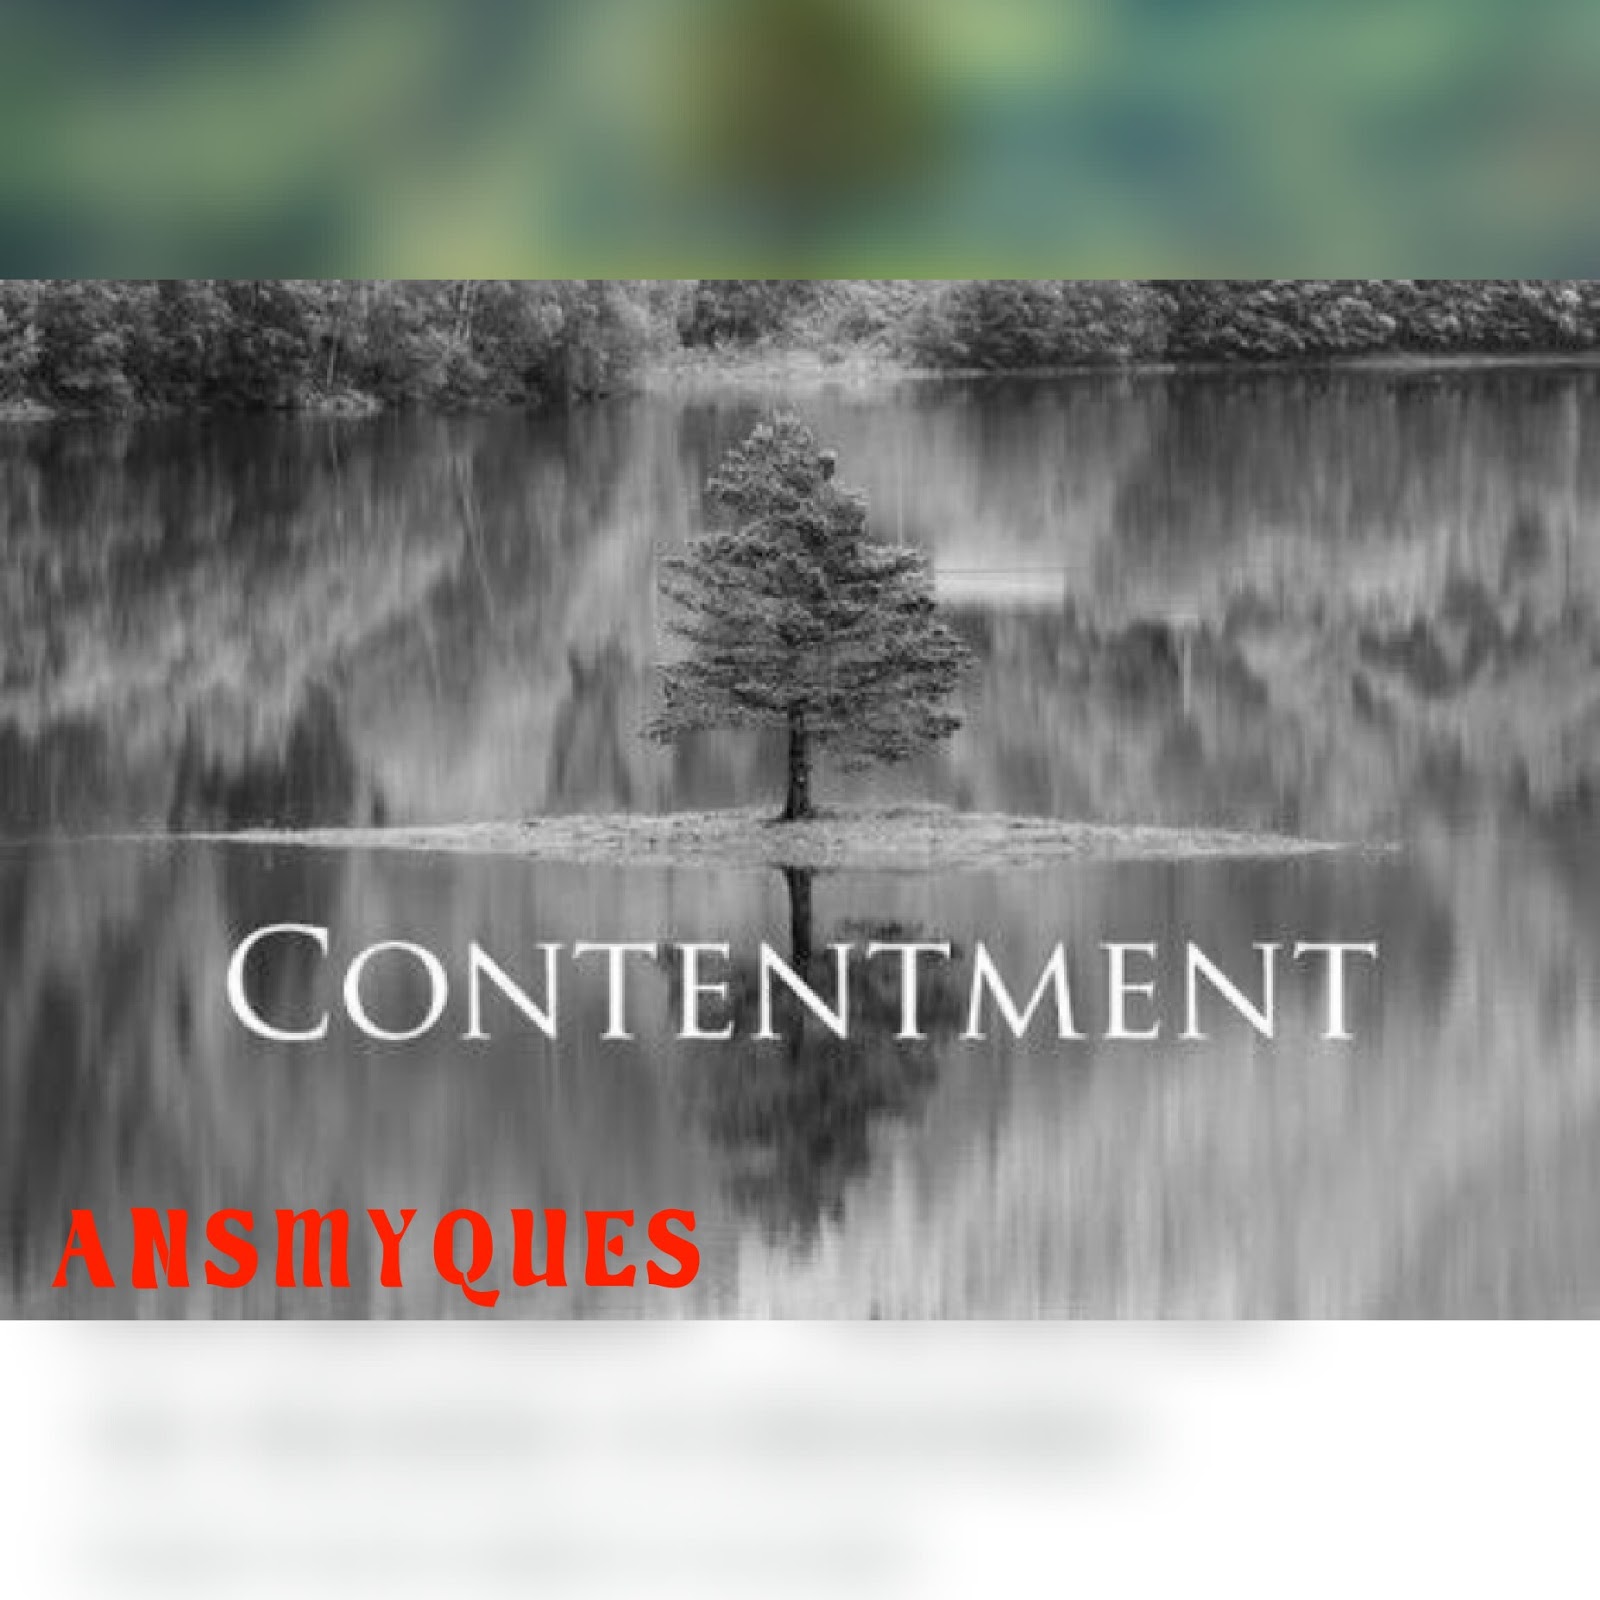 WHAT IS CONTENTMENT? ATTRIBUTES, AND EFFECT OF LACK OF CONTENTMENT